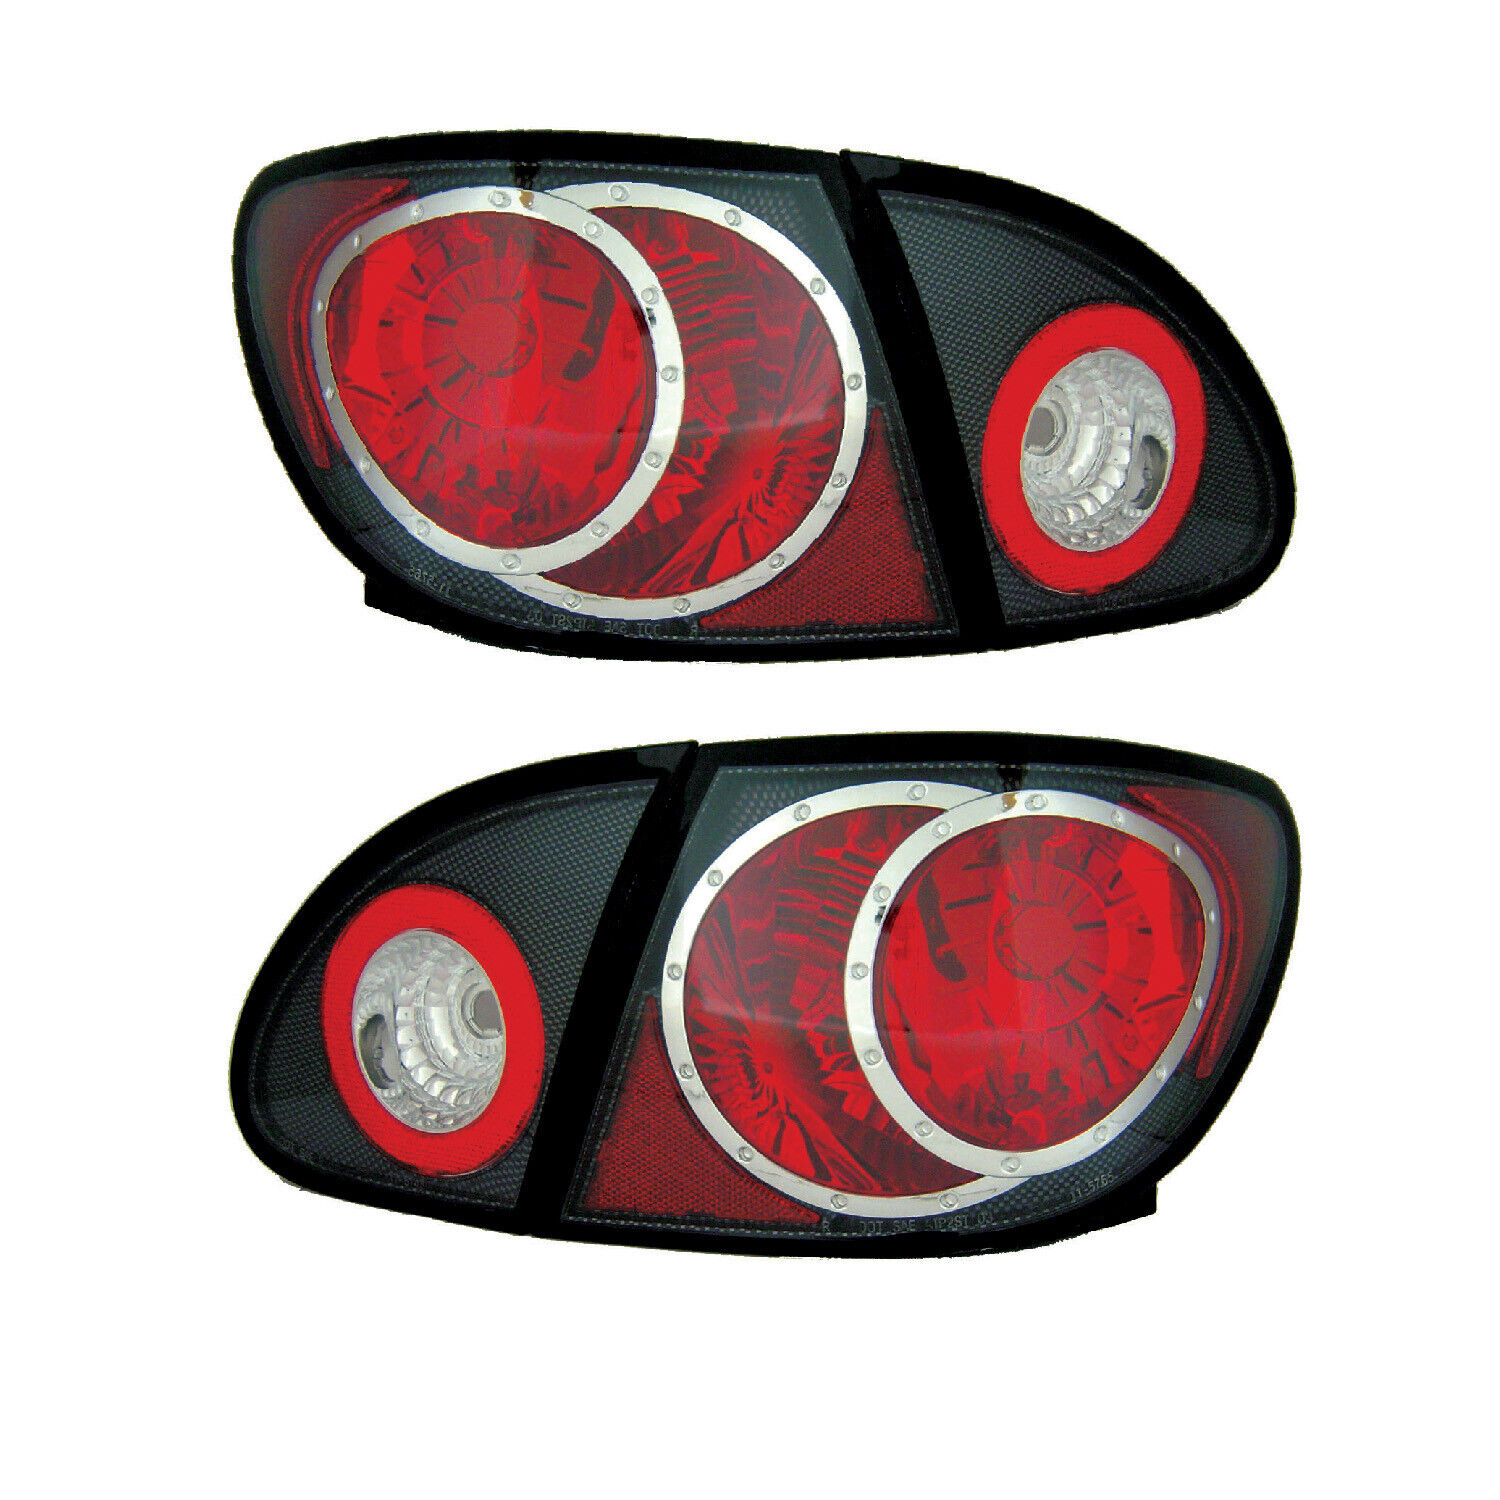 TYC Euro Taillights set with Carbon Fiber Housing Fits 2003-2007 Toyota Corolla